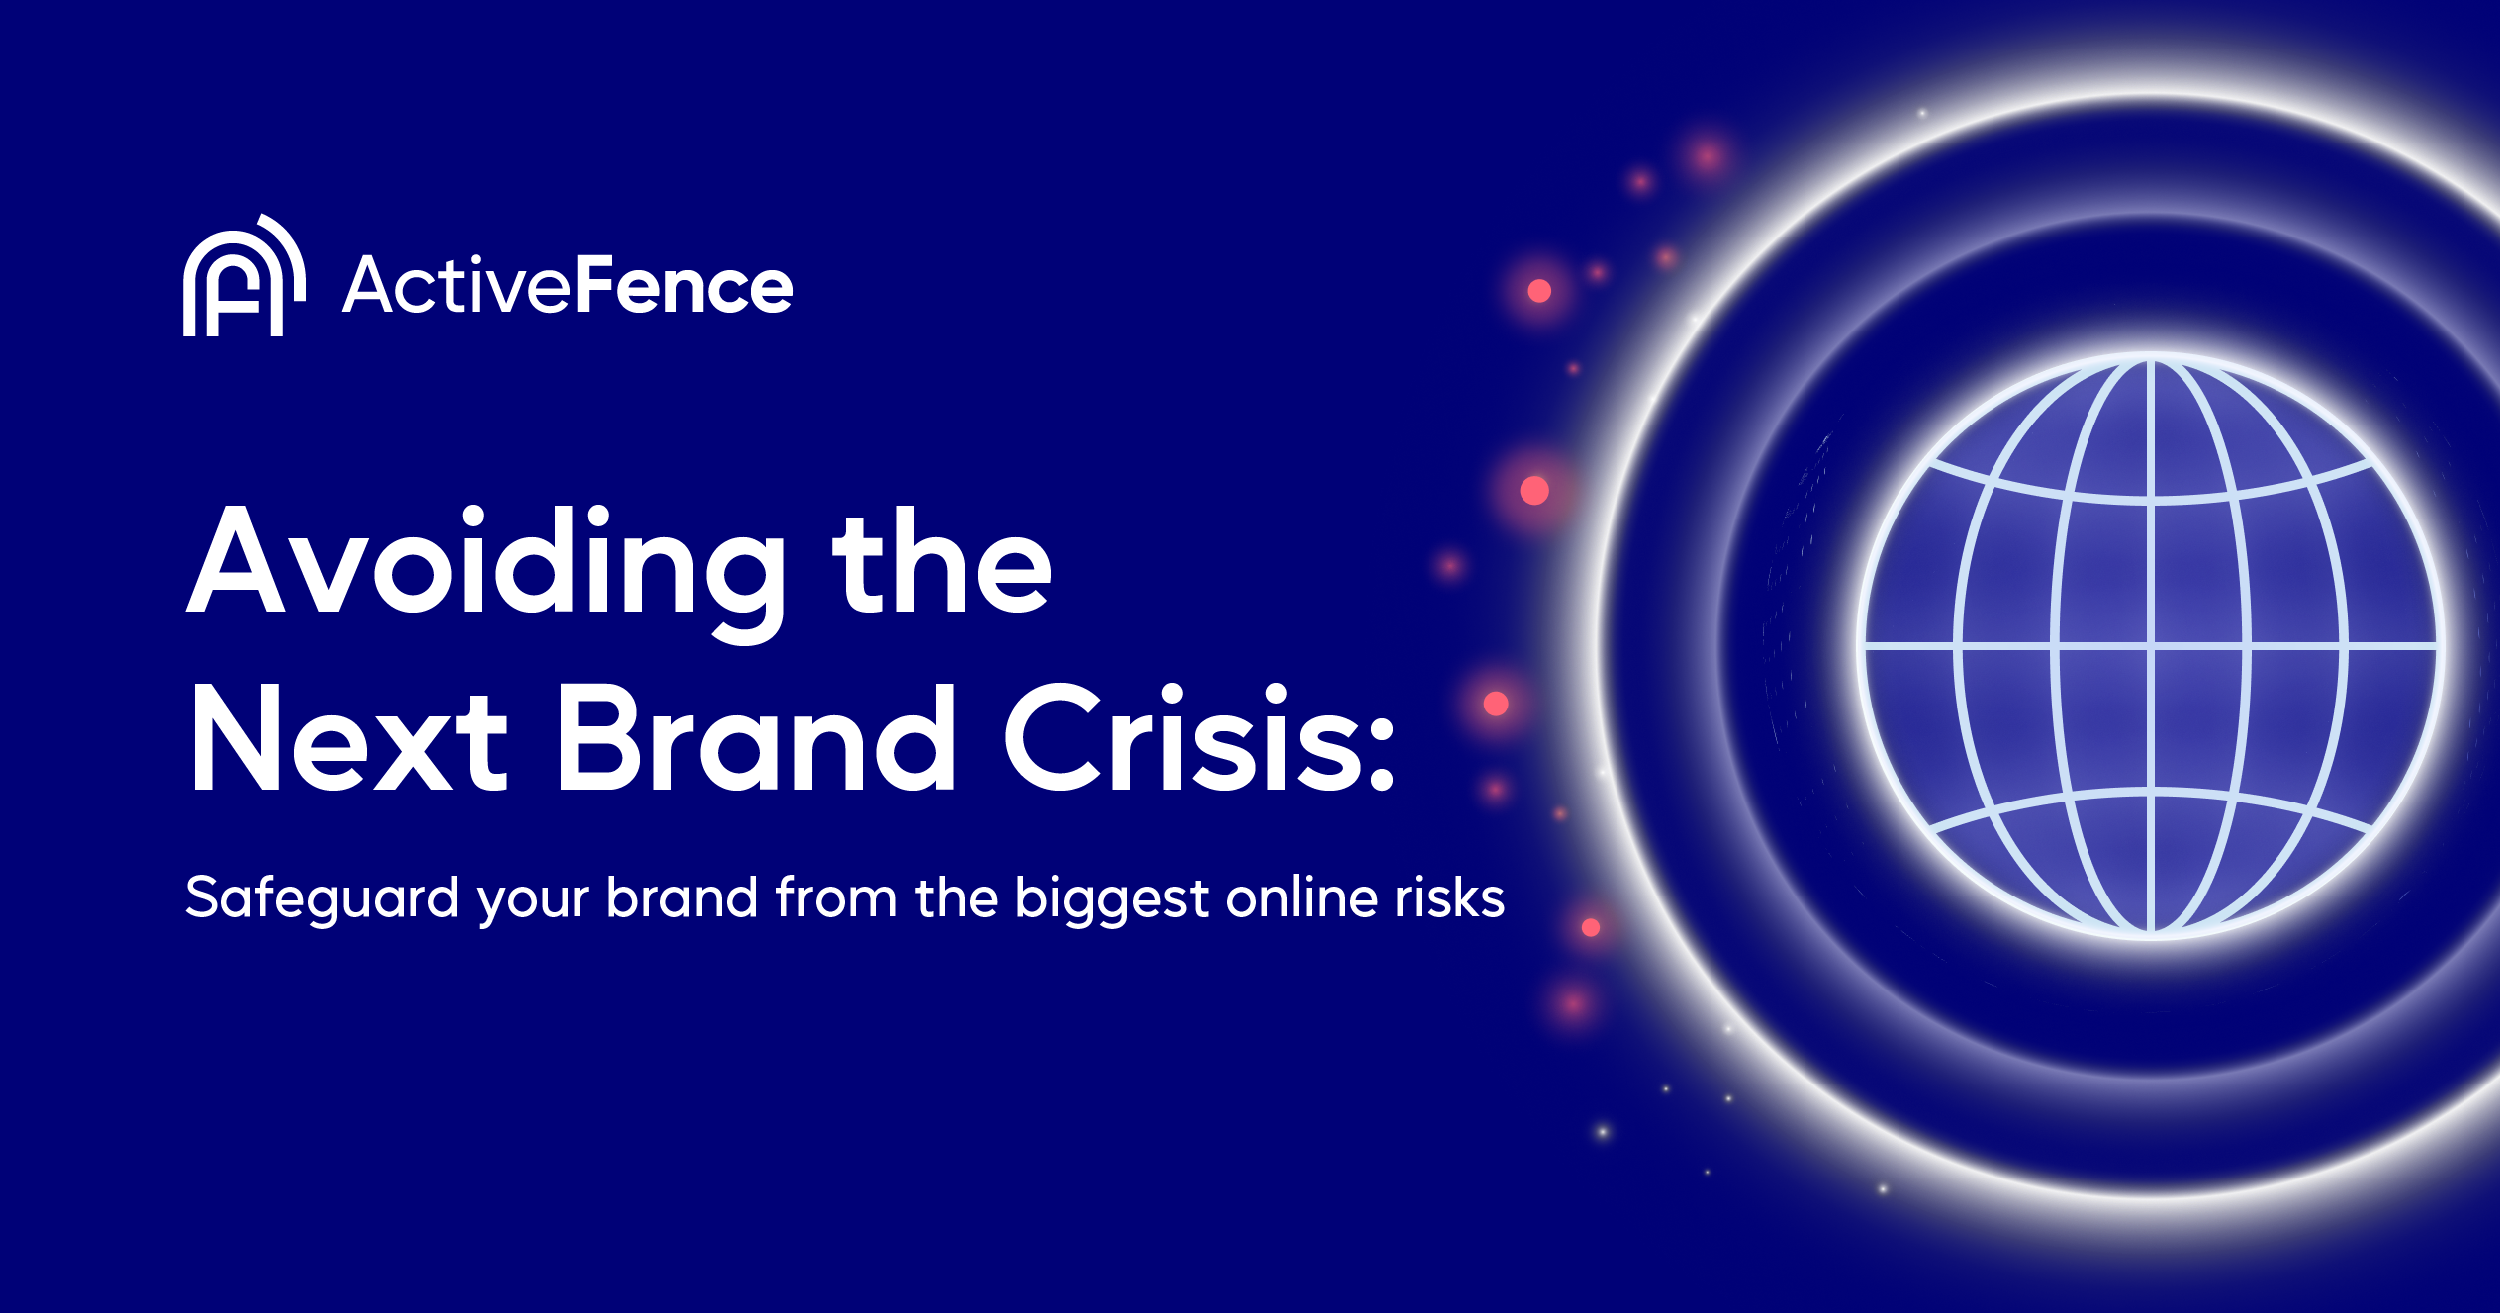 ActiveFence banner with the text 'Avoiding the Next Brand Crisis: Safeguard your brand from the biggest online risks' next to a globe icon.